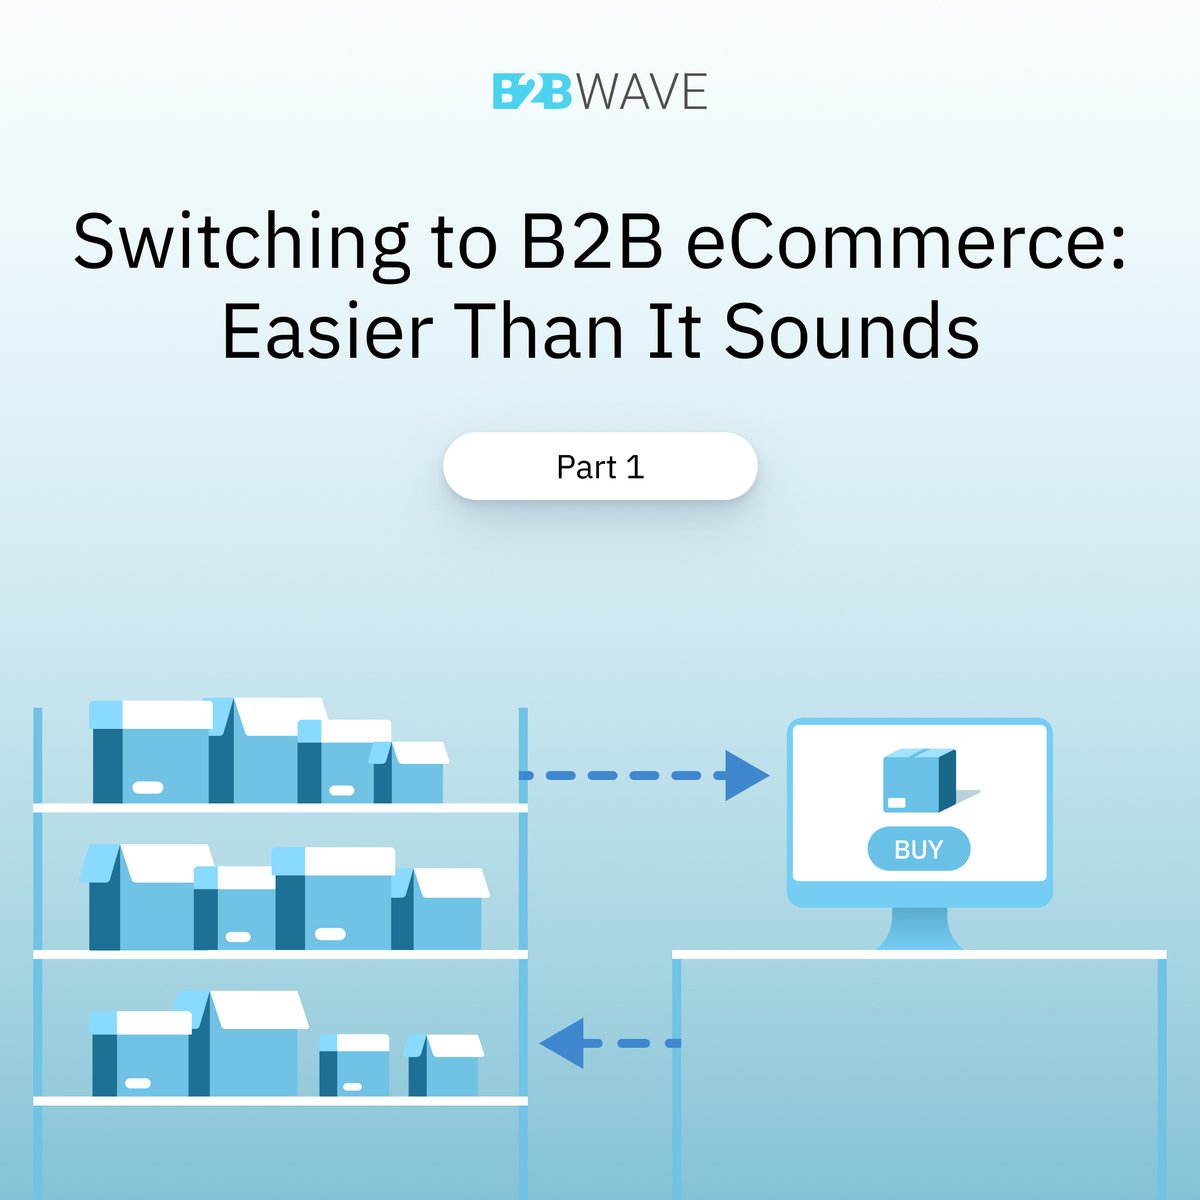 Switching to B2B eCommerce: Easier Than It Sounds (Part 1)

While technology has made many tasks easier, the transition to eCommerce can still be daunting, it requires careful planning.

Read the full article: bit.ly/3ZxN4nc

#b2bwave #B2BeCommerce #DigitalStrategy